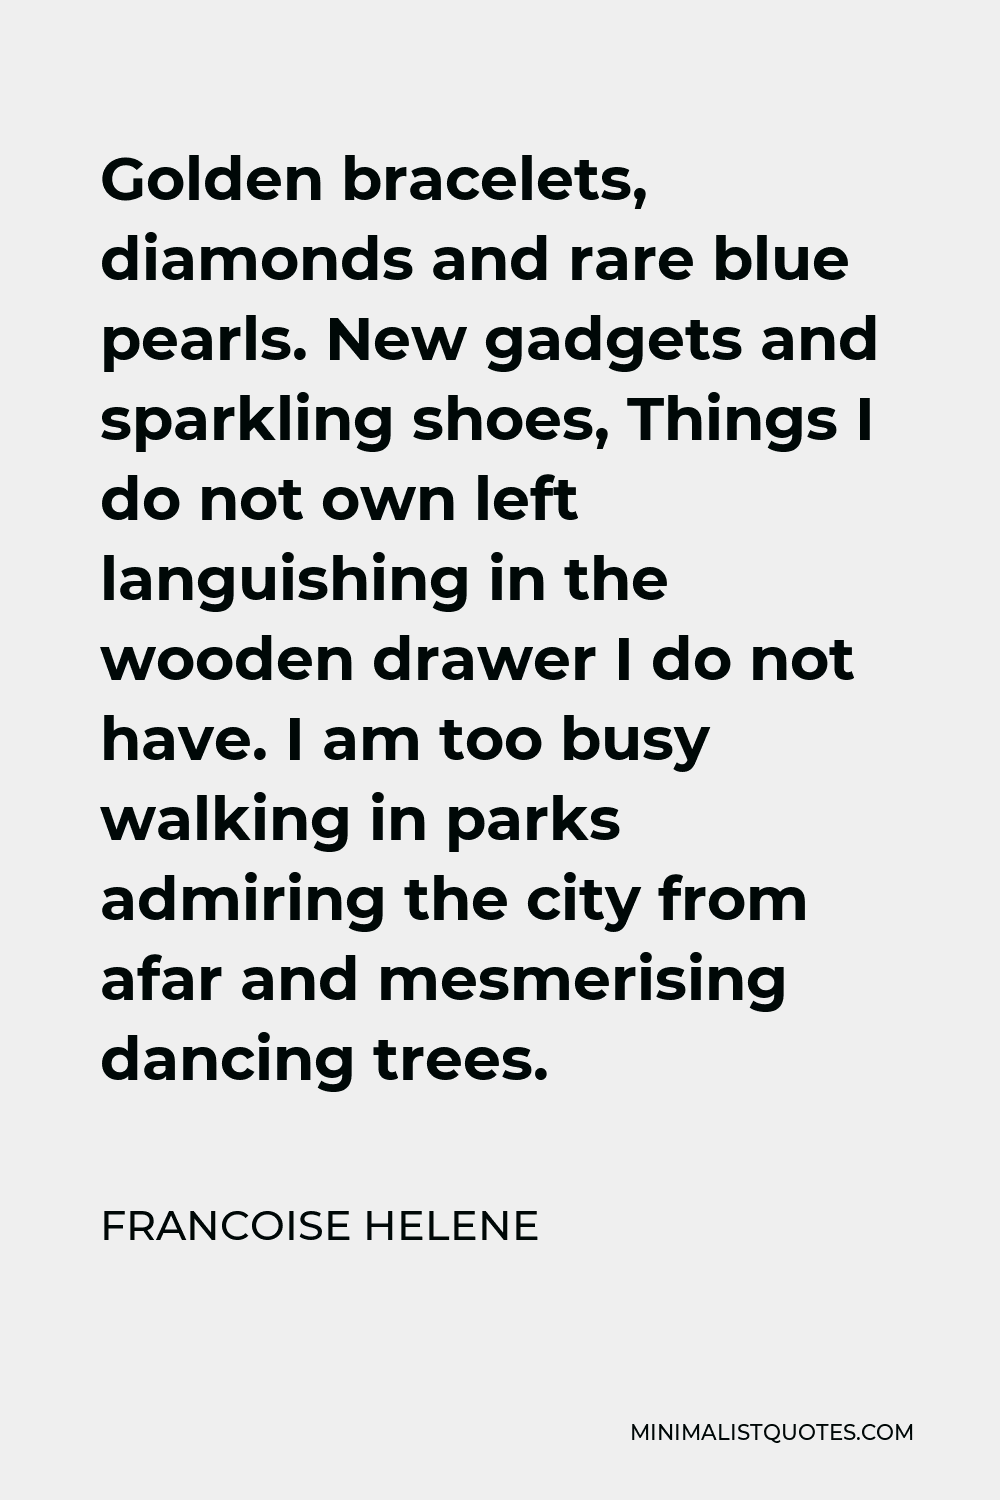 Francoise Helene Quote - Golden bracelets, diamonds and rare blue pearls. New gadgets and sparkling shoes, Things I do not own left languishing in the wooden drawer I do not have. I am too busy walking in parks admiring the city from afar and mesmerising dancing trees.